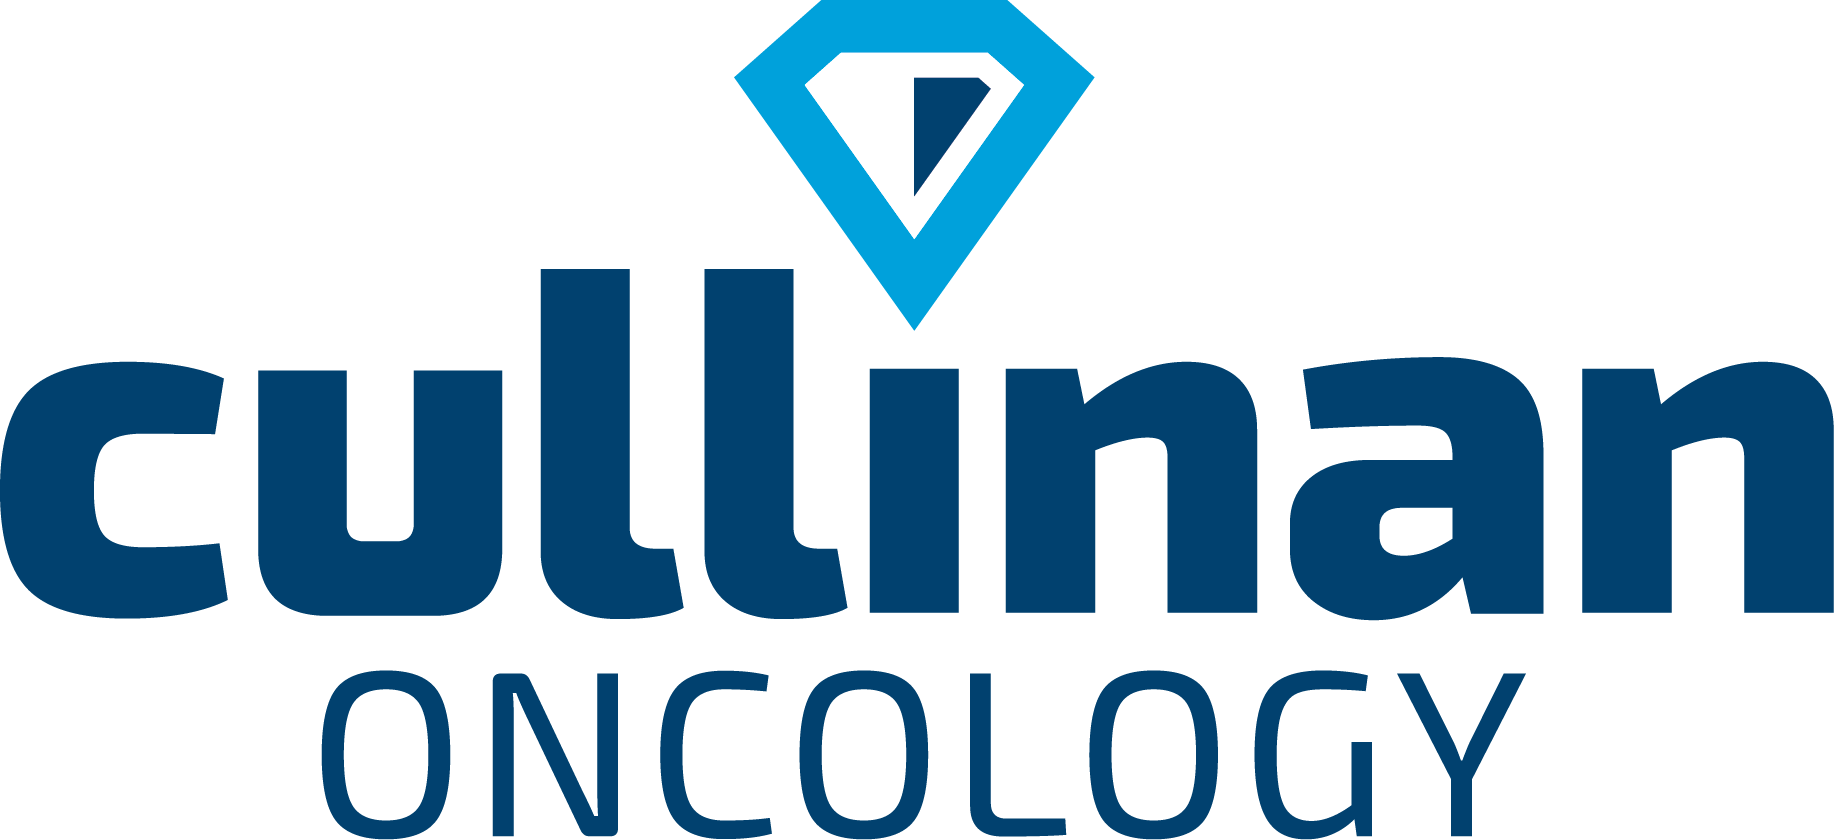 FDA Grants Breakthrough Therapy Designation for Cullinan Oncology’s CLN-081 in Patients with Locally Advanced or Metastatic EGFR-Mutated Non-Small Cell Lung Cancer